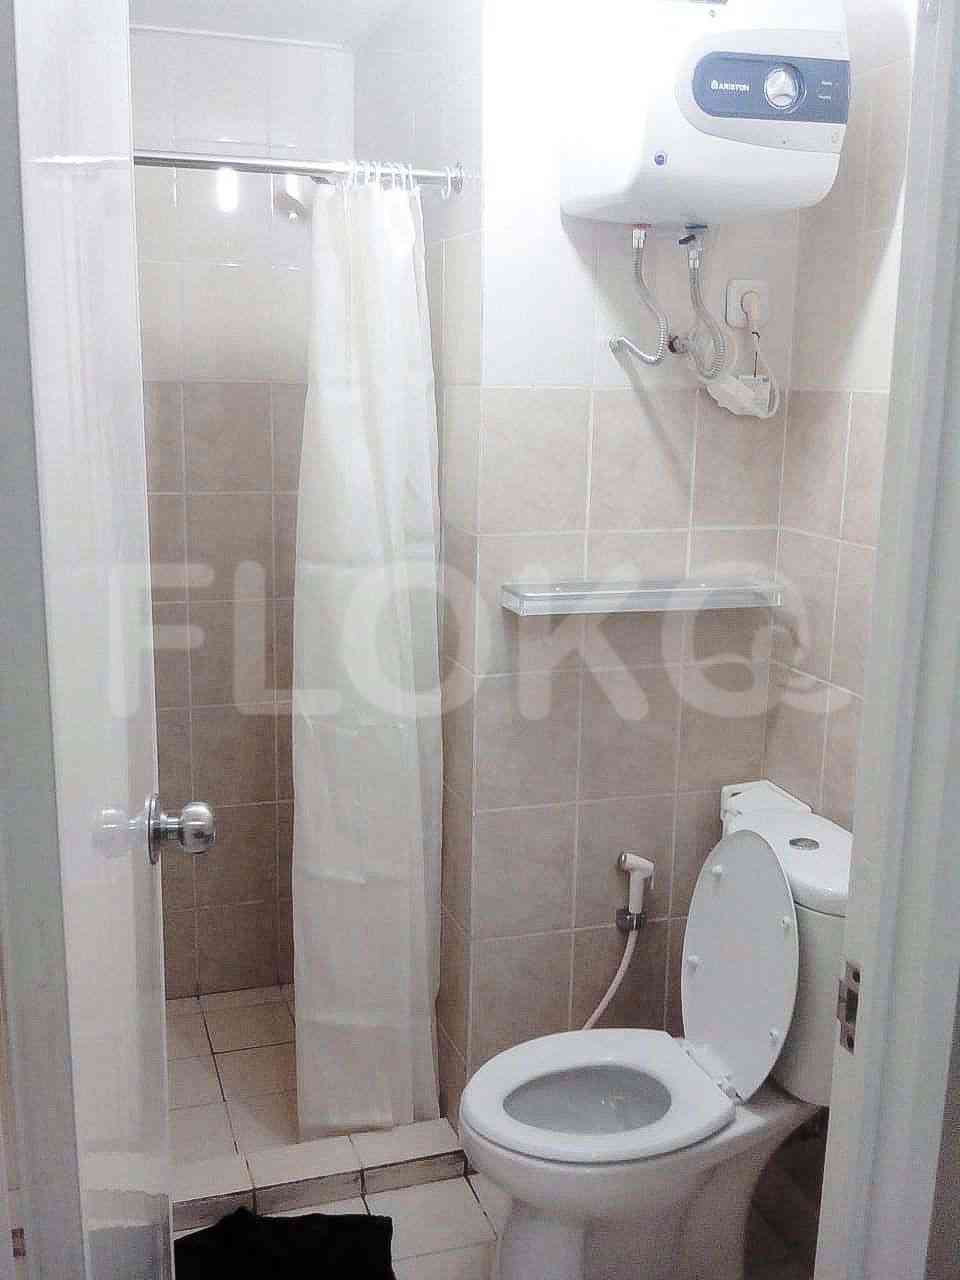 2 Bedroom on 5th Floor for Rent in Green Bay Pluit Apartment - fpl536 8